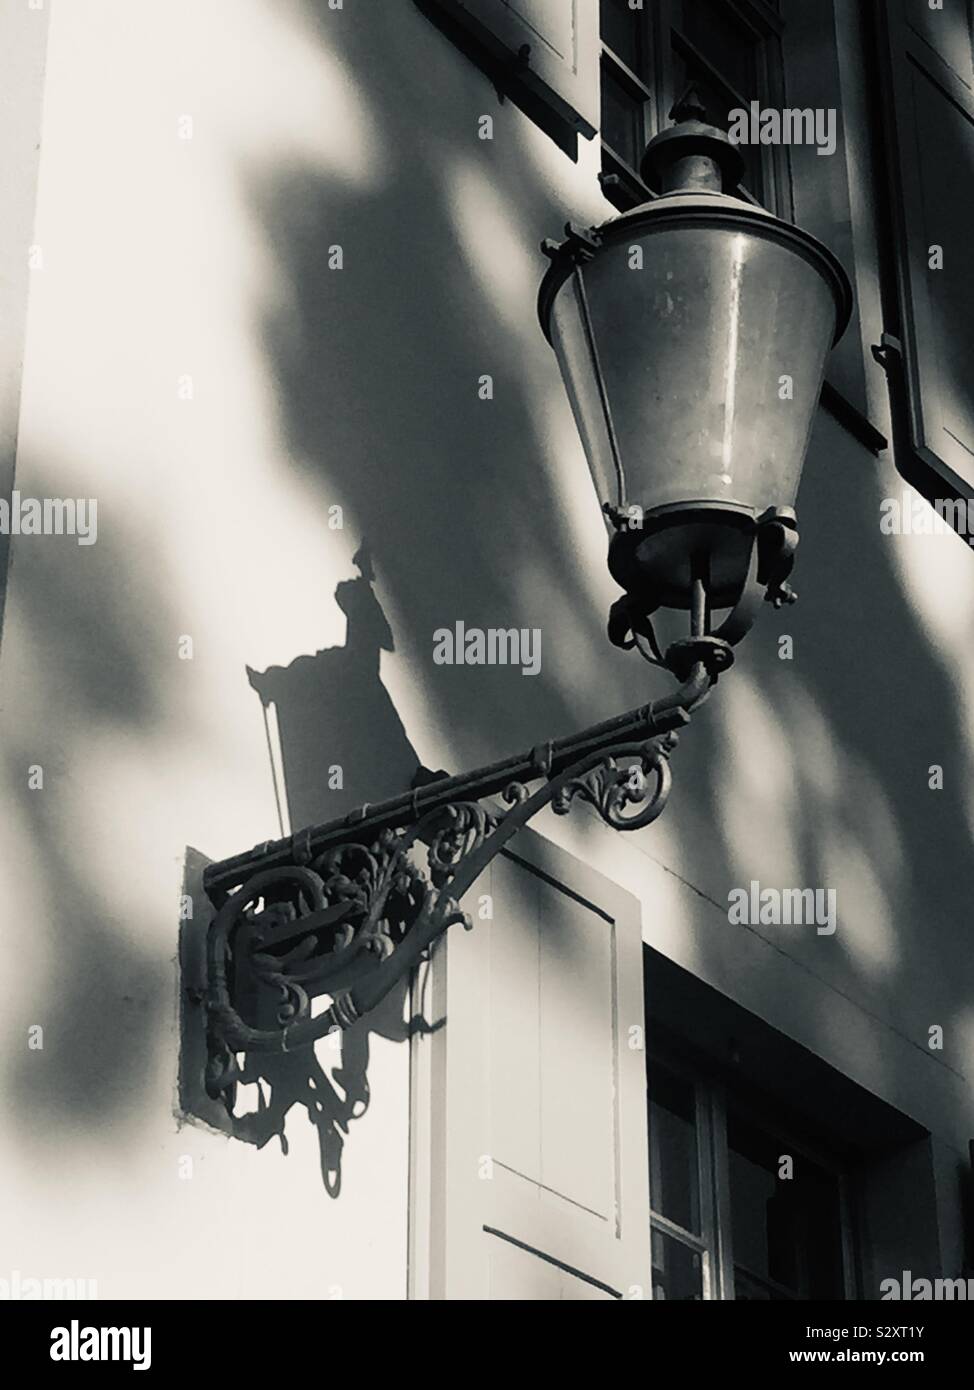 Street lantern hanging from wall in black and white Stock Photo